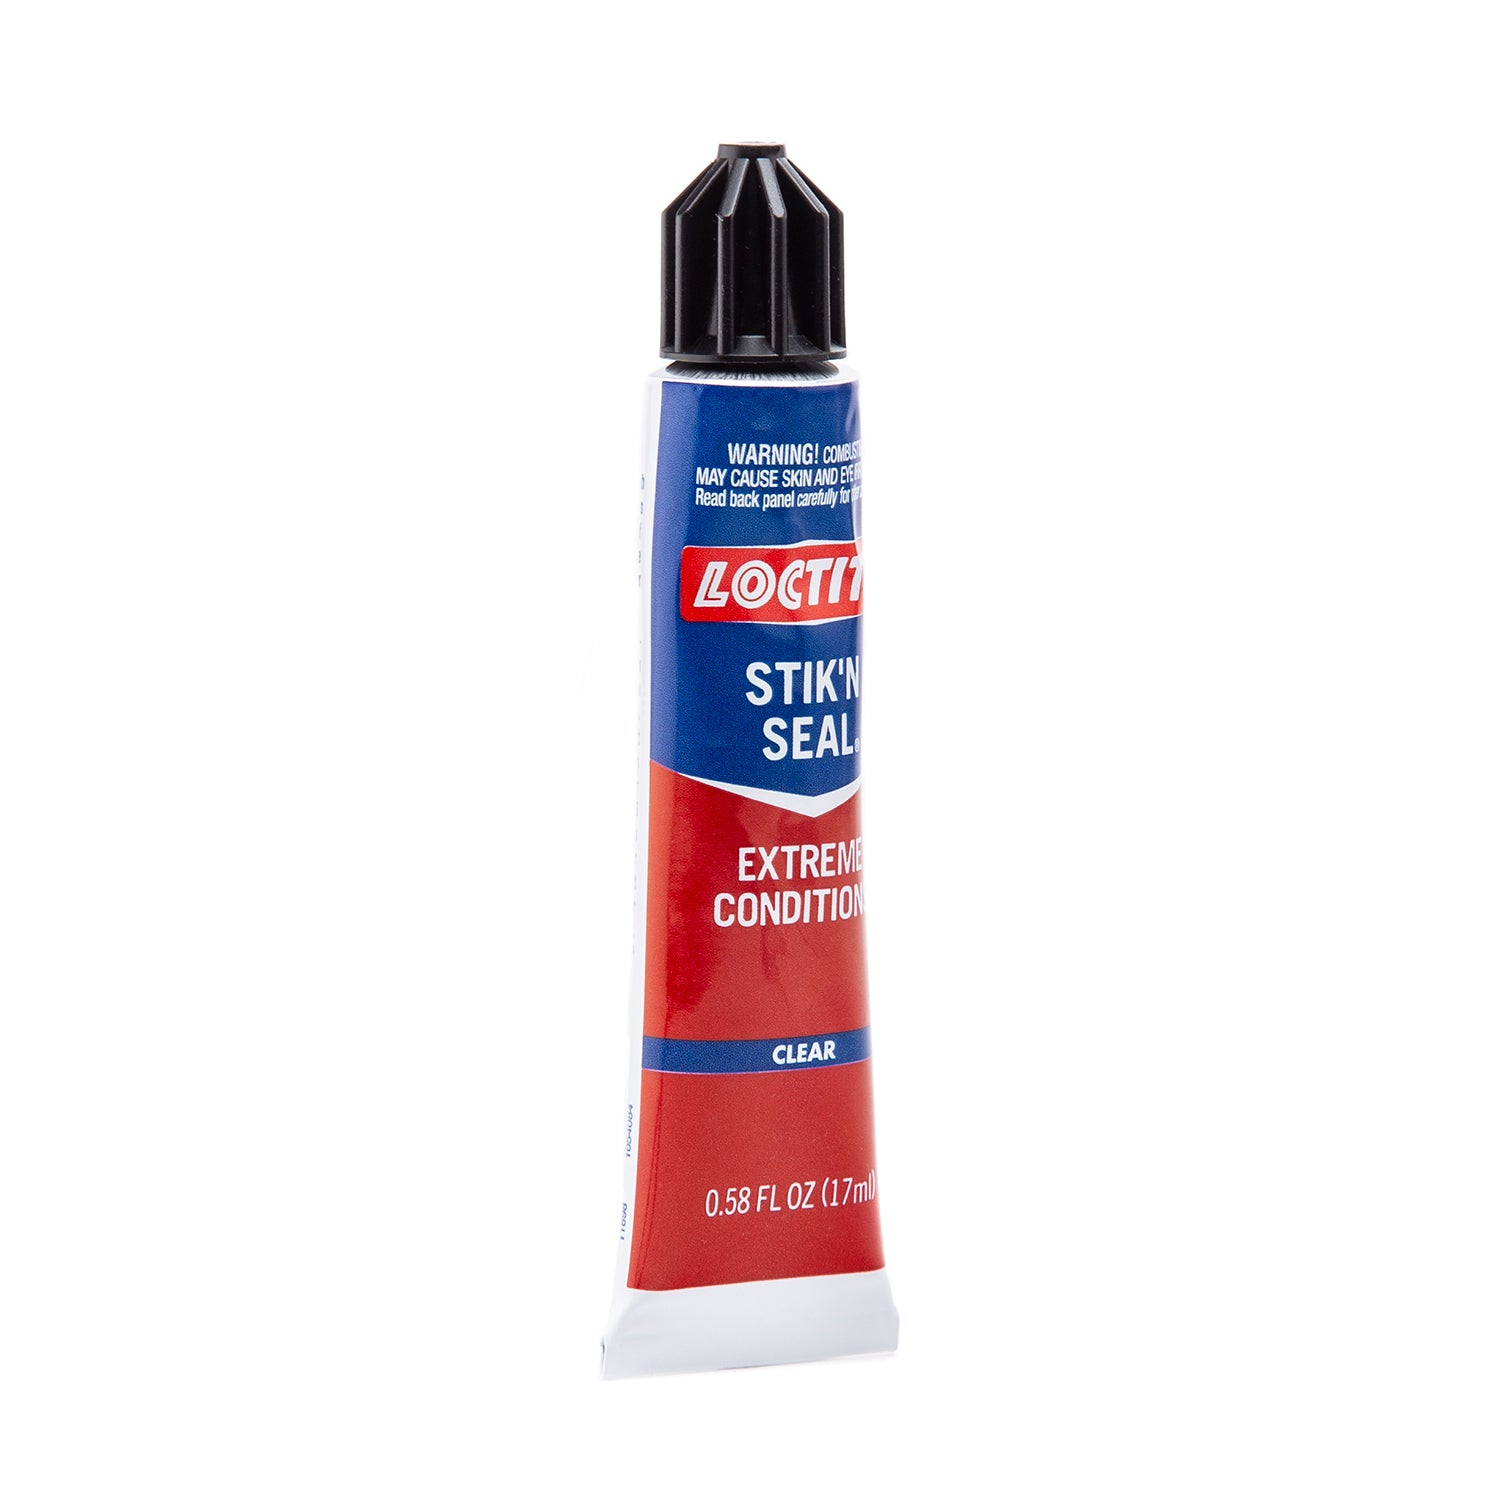 Loctite Stik 'N Seal® Extreme Conditions - .58 oz. data-zoom=